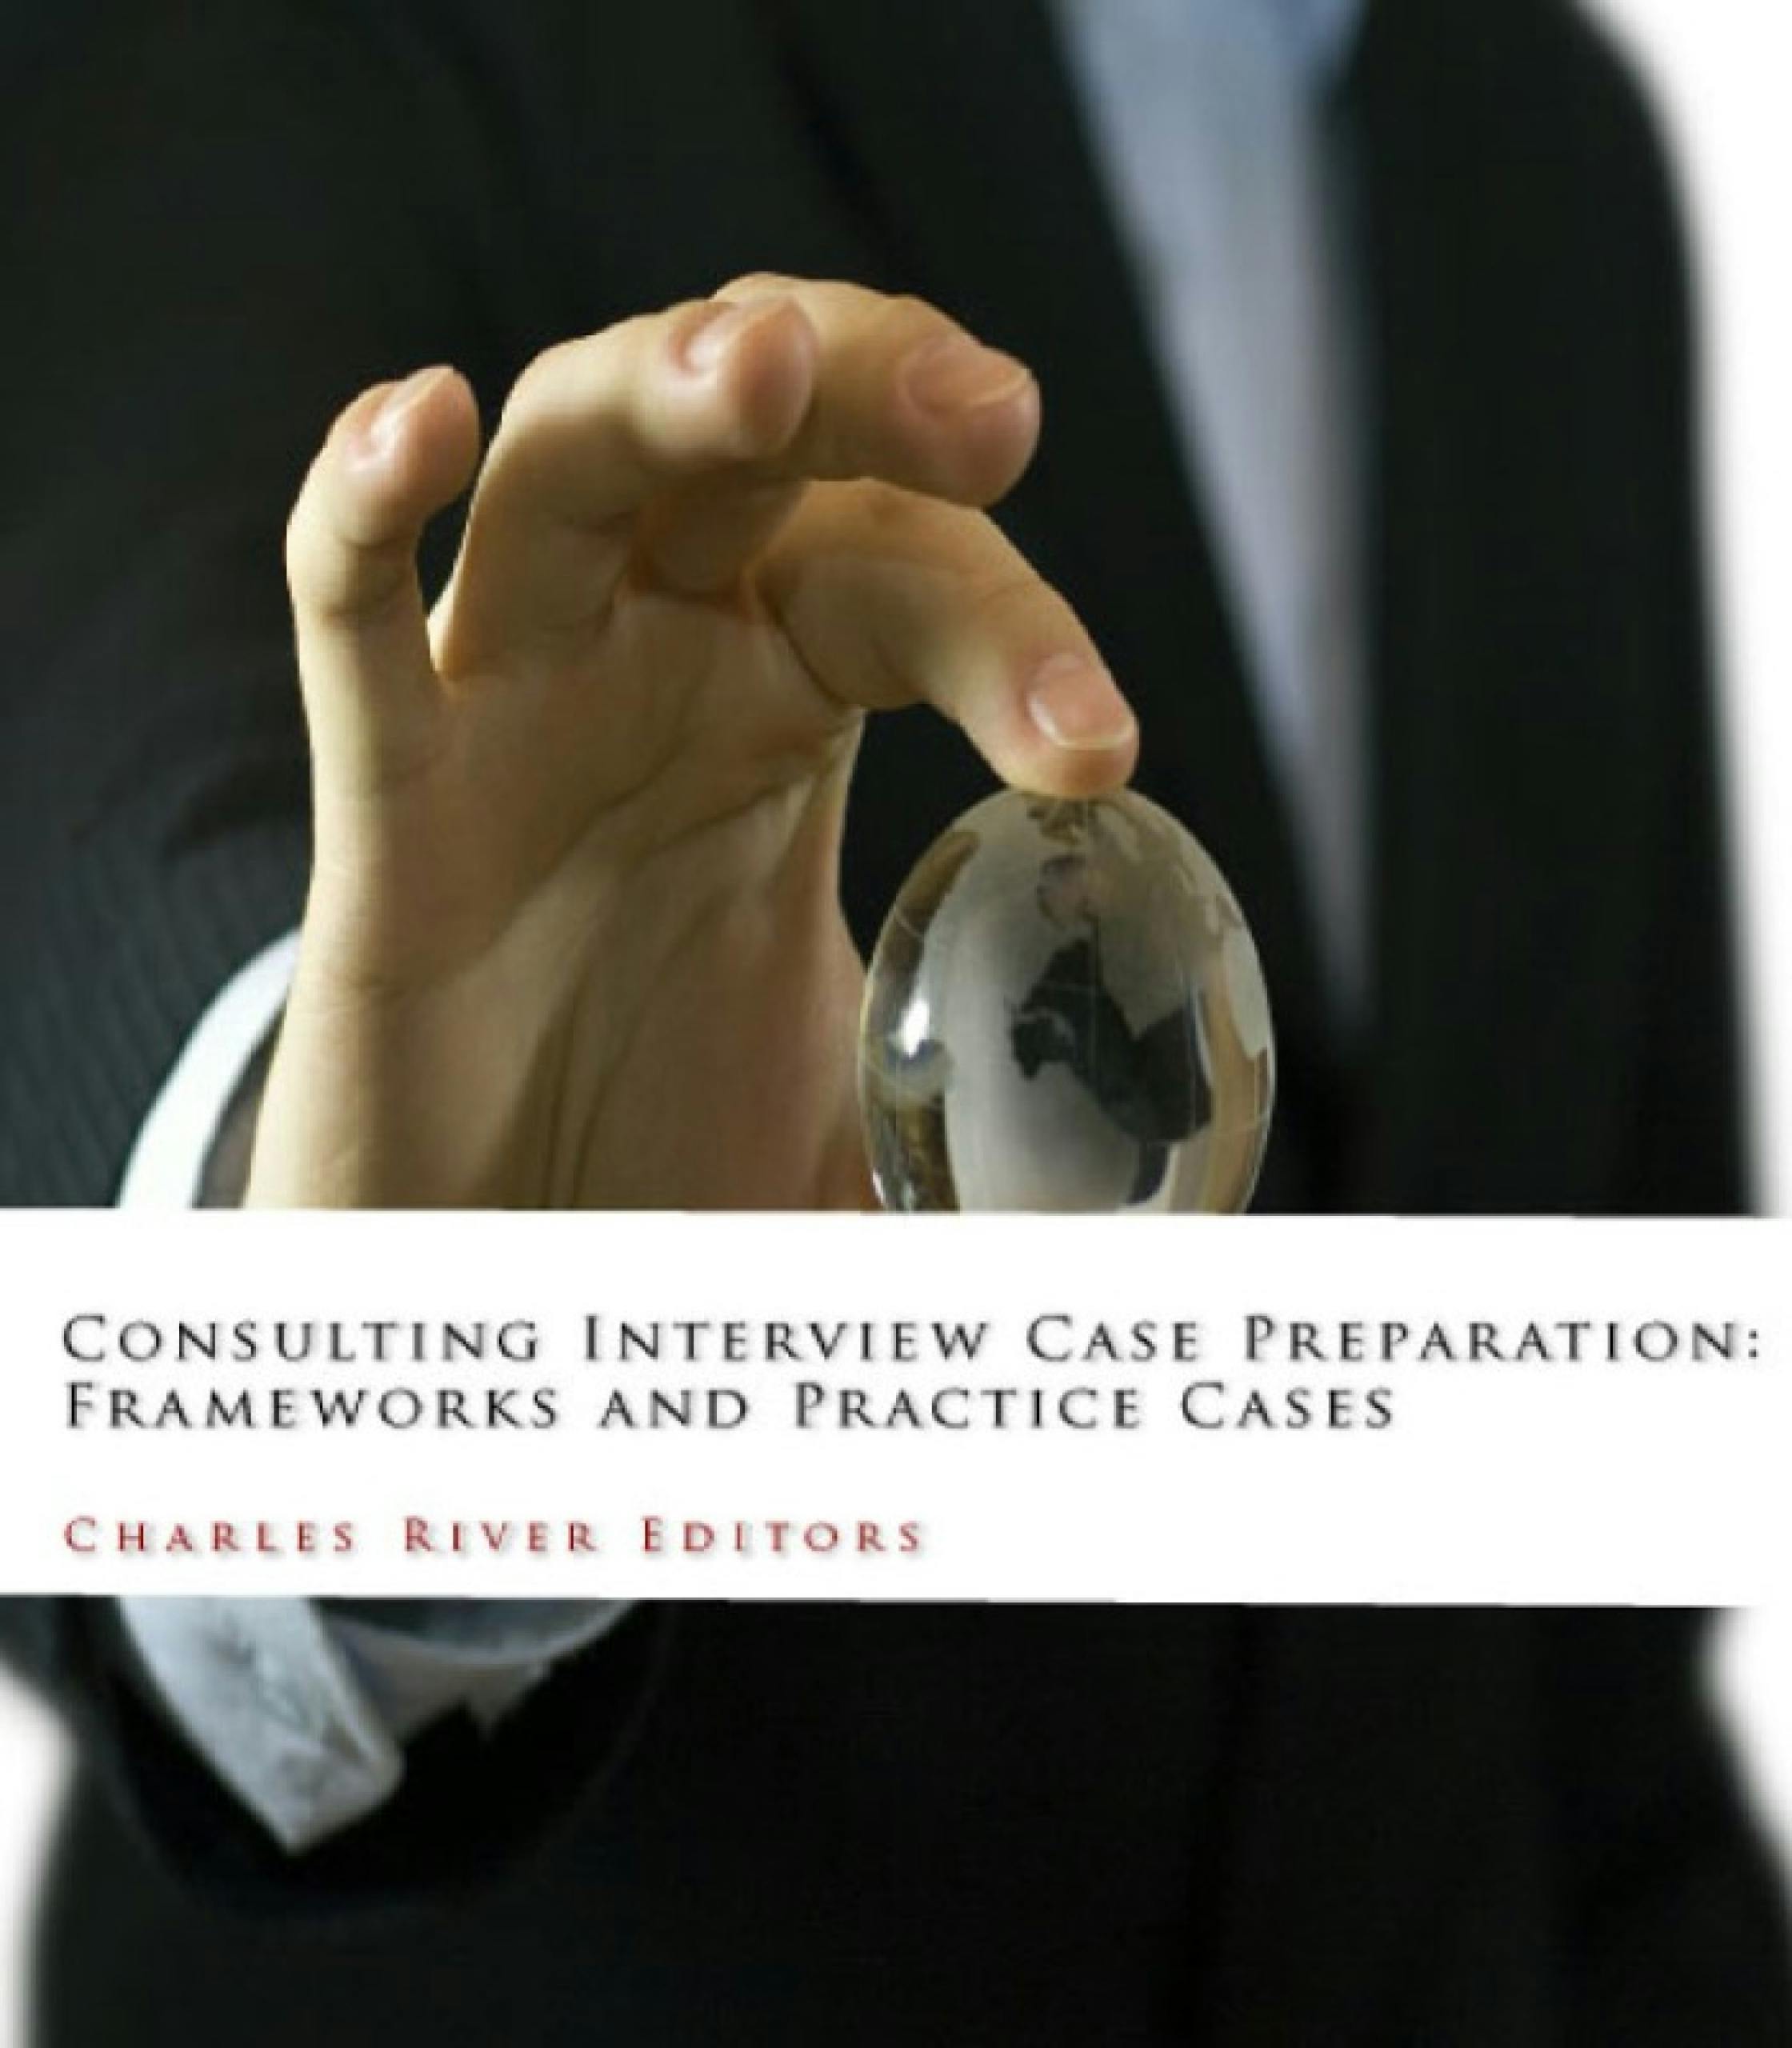 Consulting Interview Case Preparation - undefined